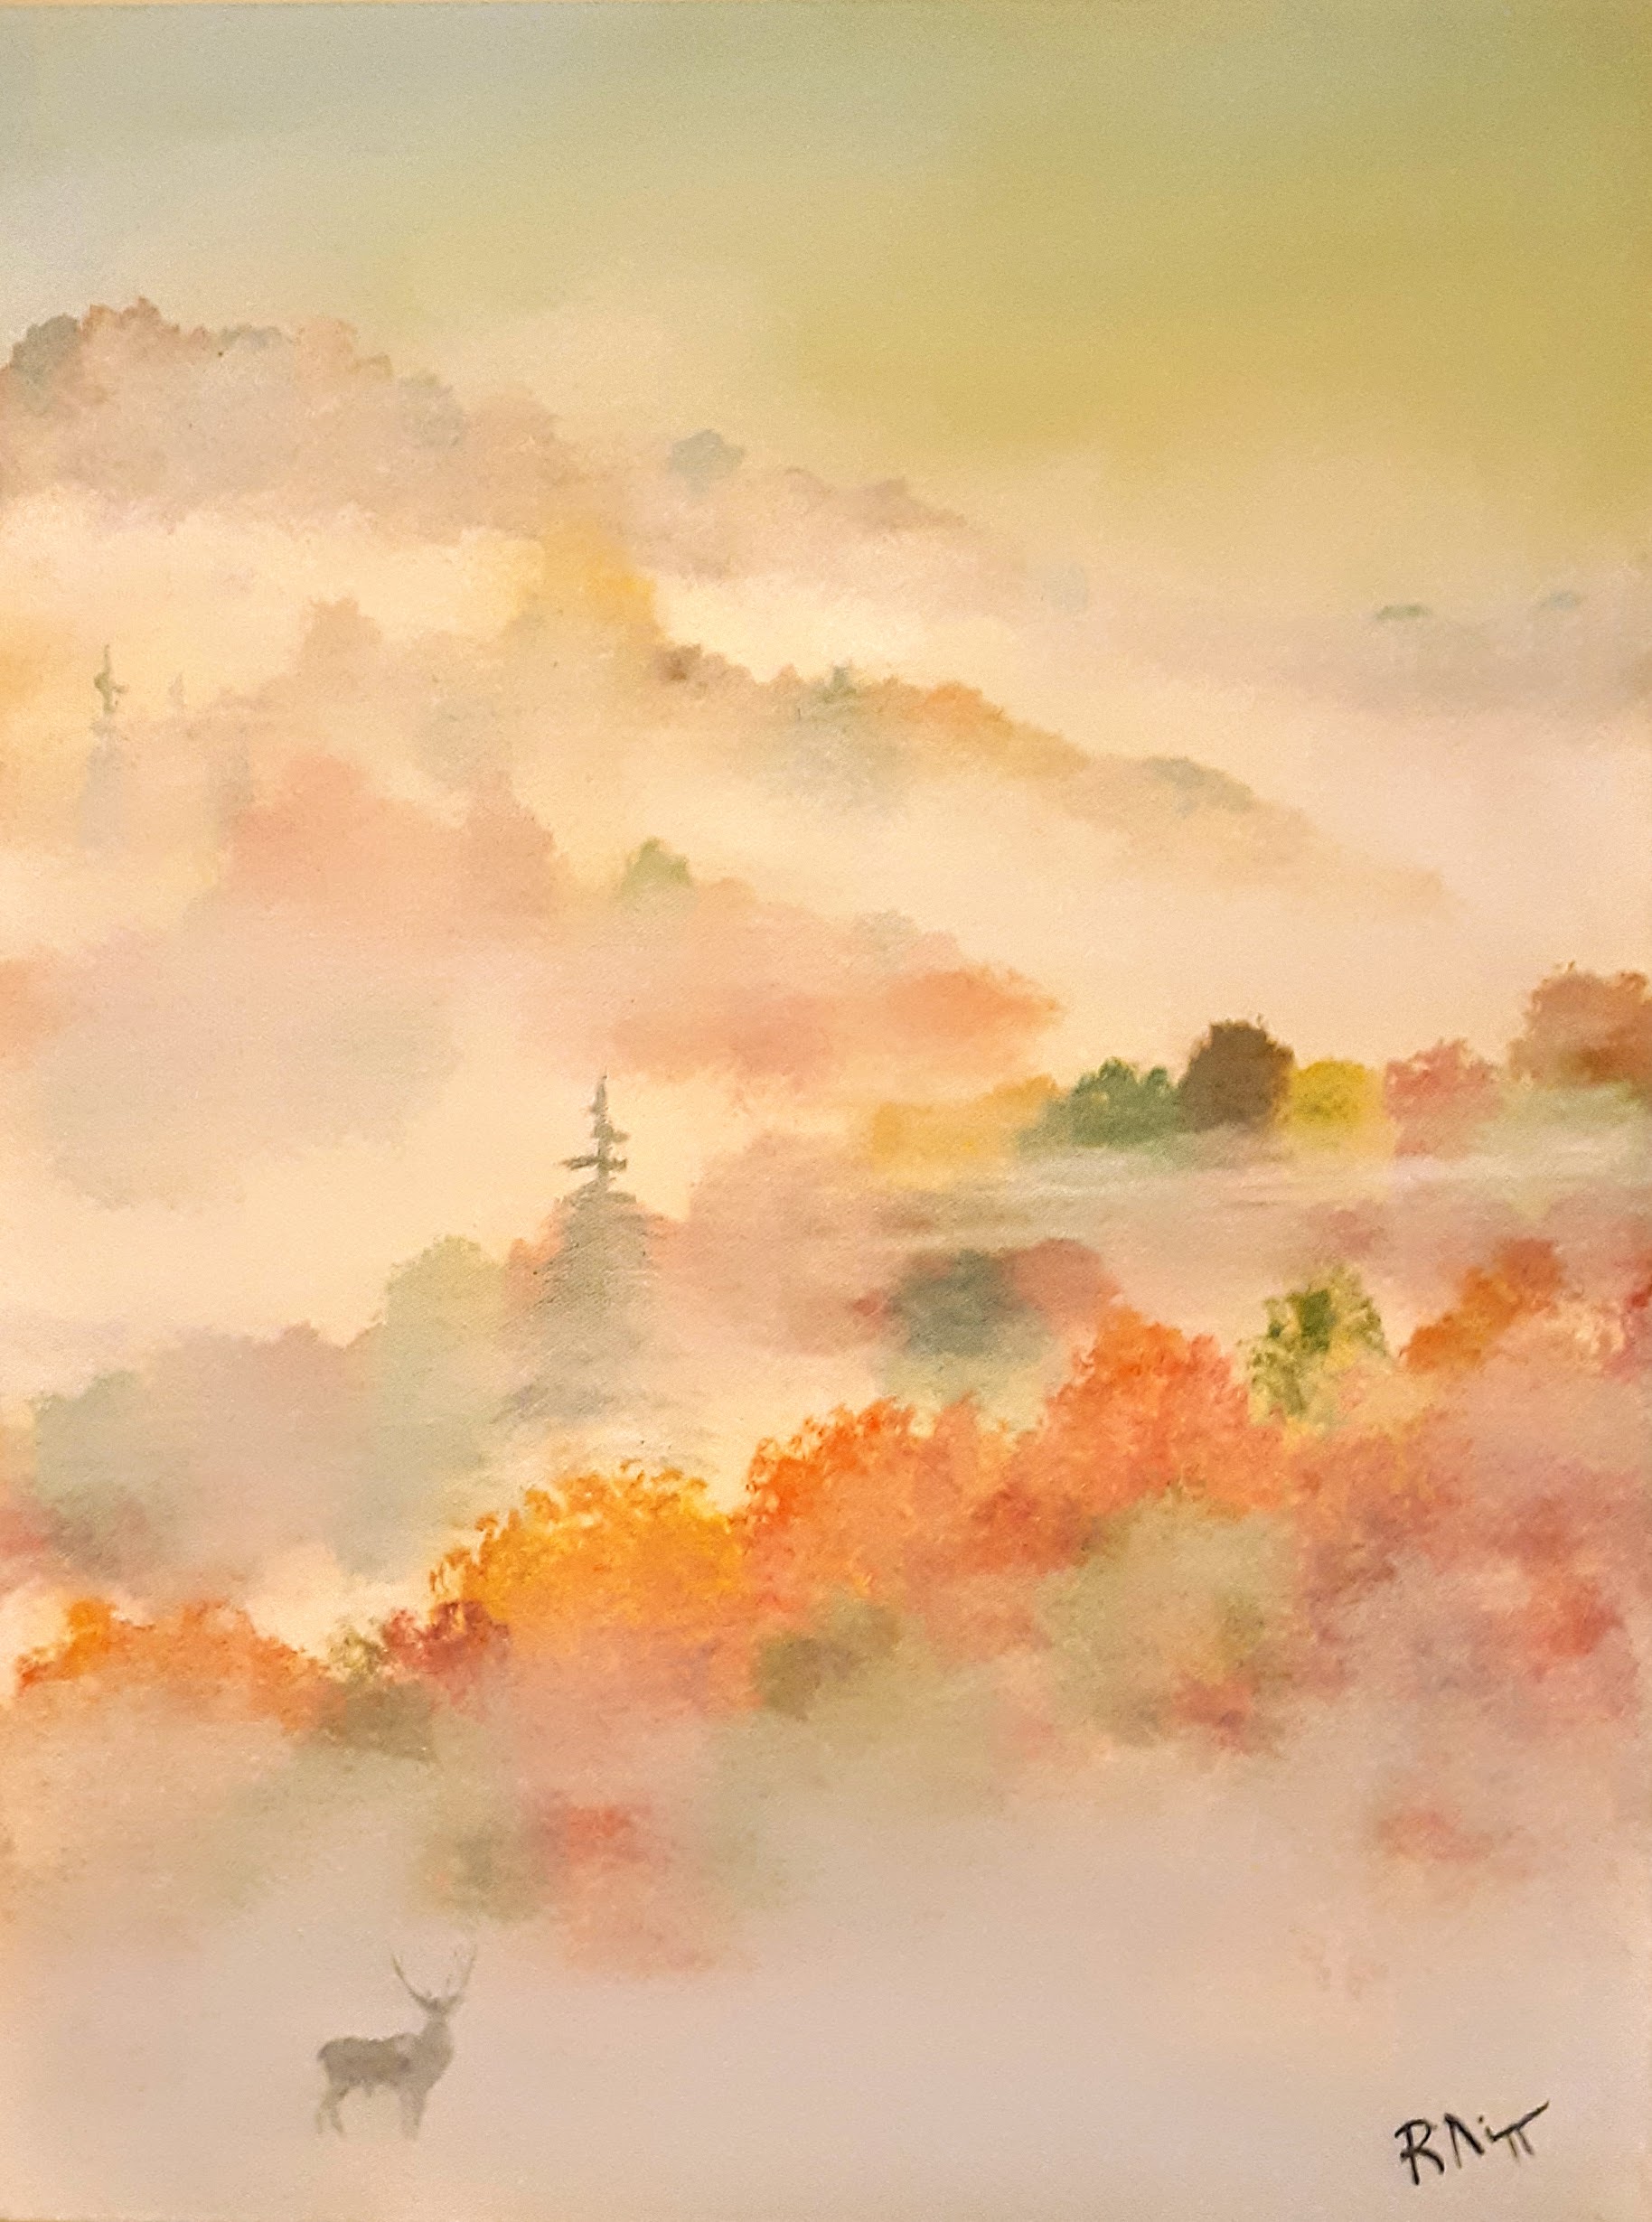 18 x 24 acrylic on canvas of a misty autumn morning in the hills of Appalachia